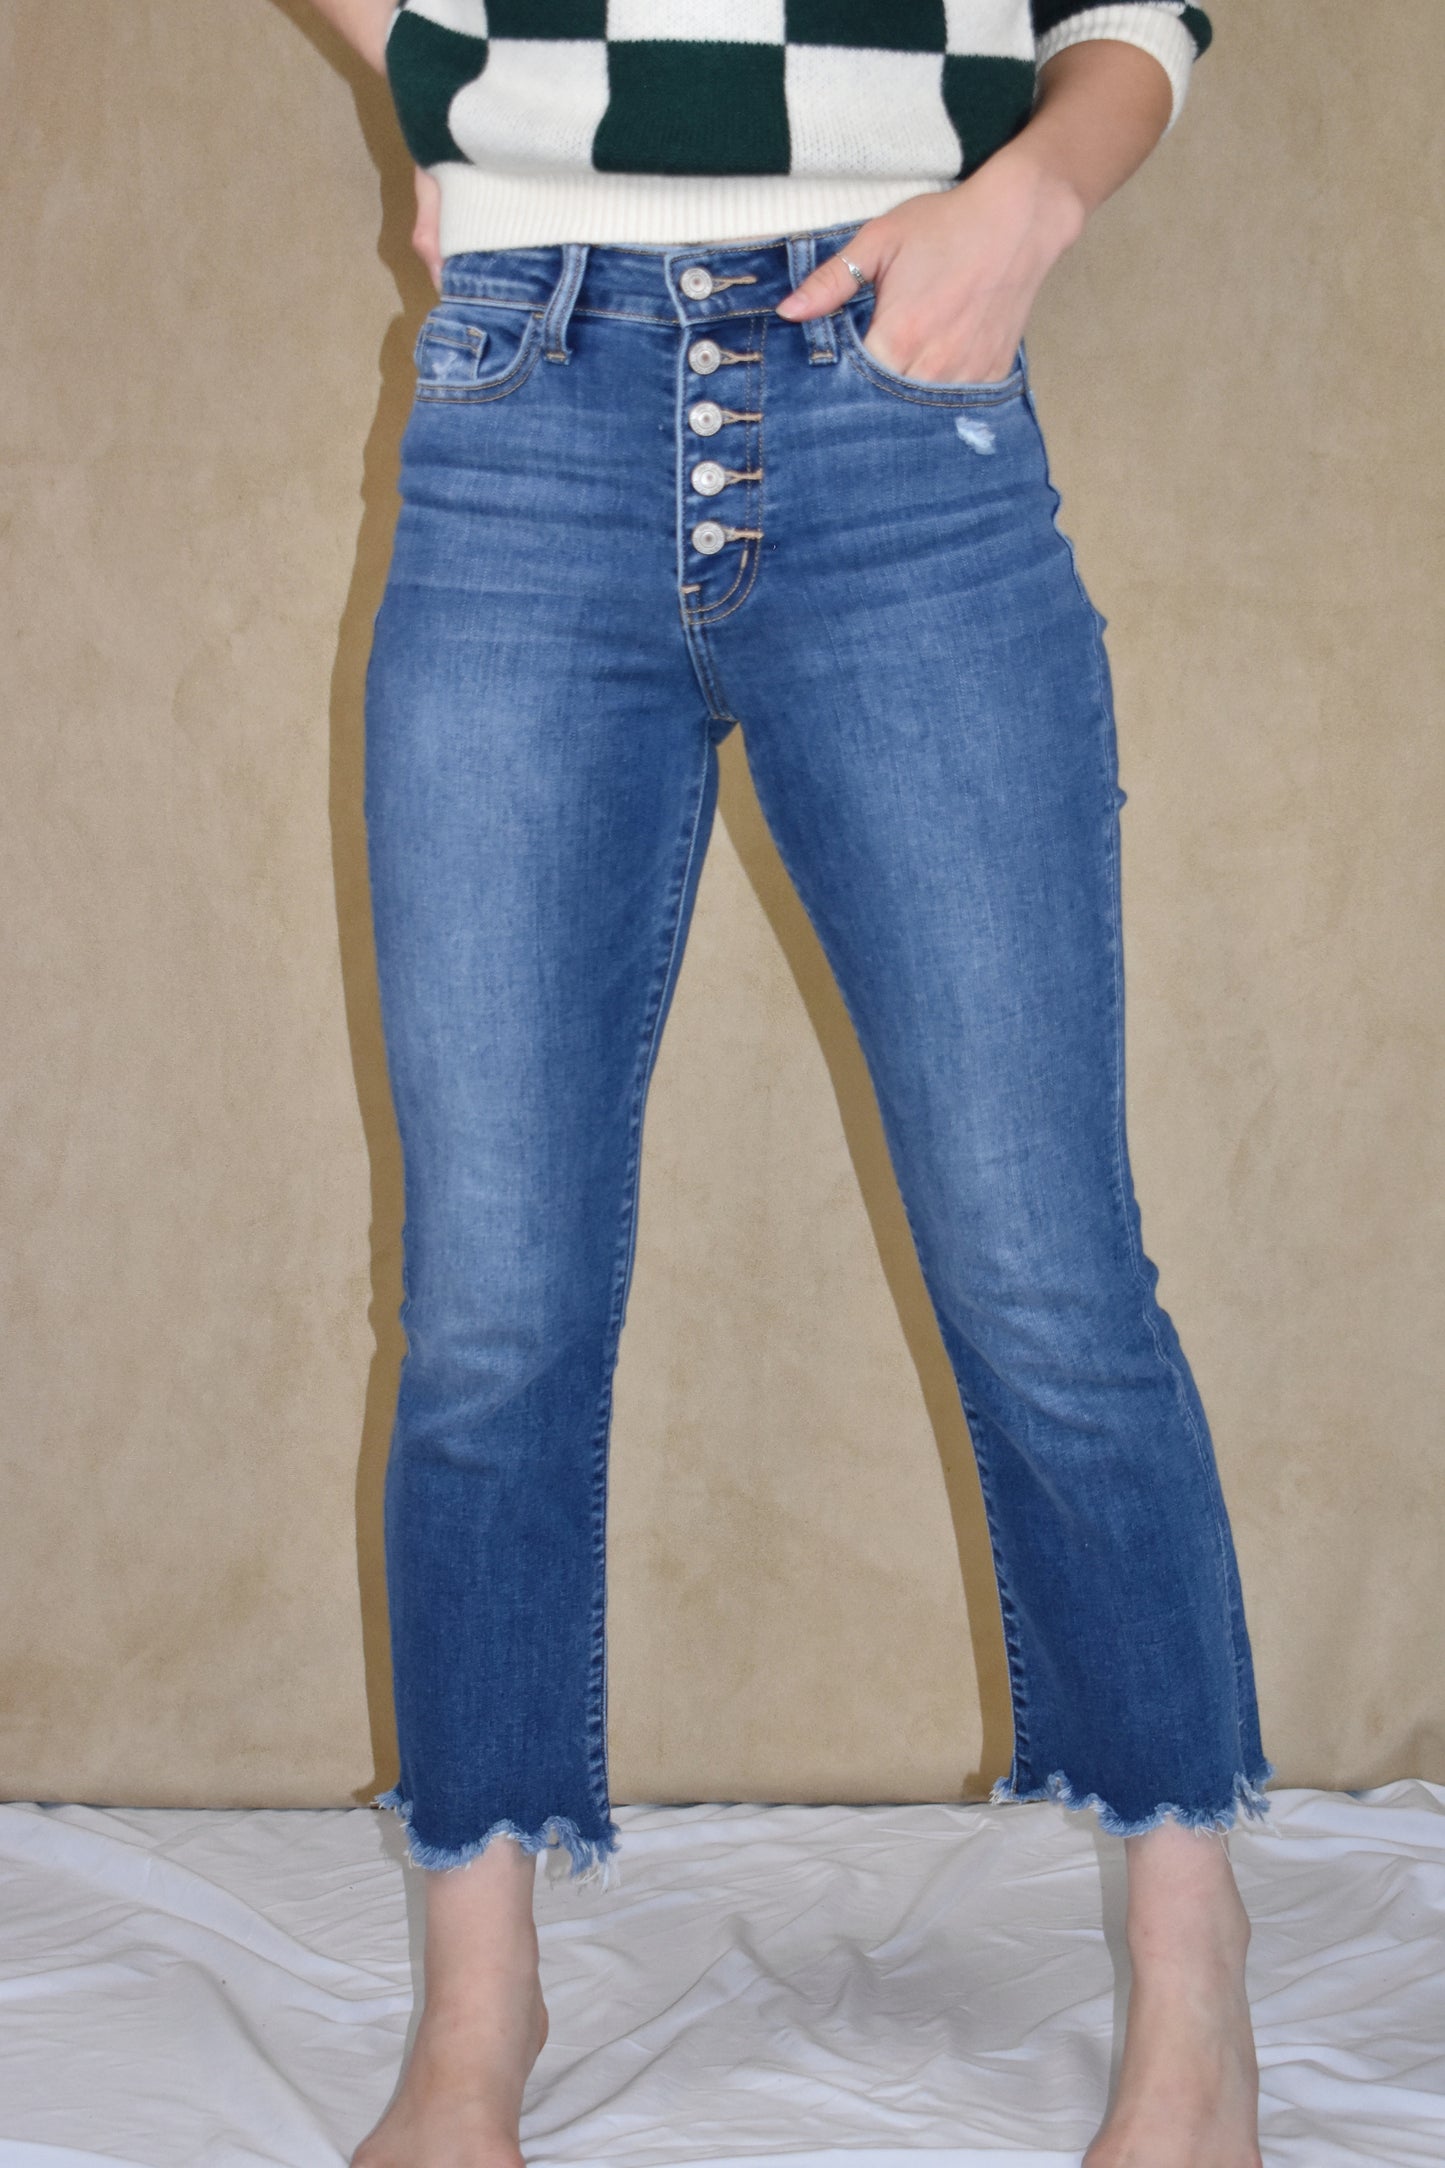 highwaisted cropped flare jeans. stretch denim with button fly and a raw hem. Vervet.